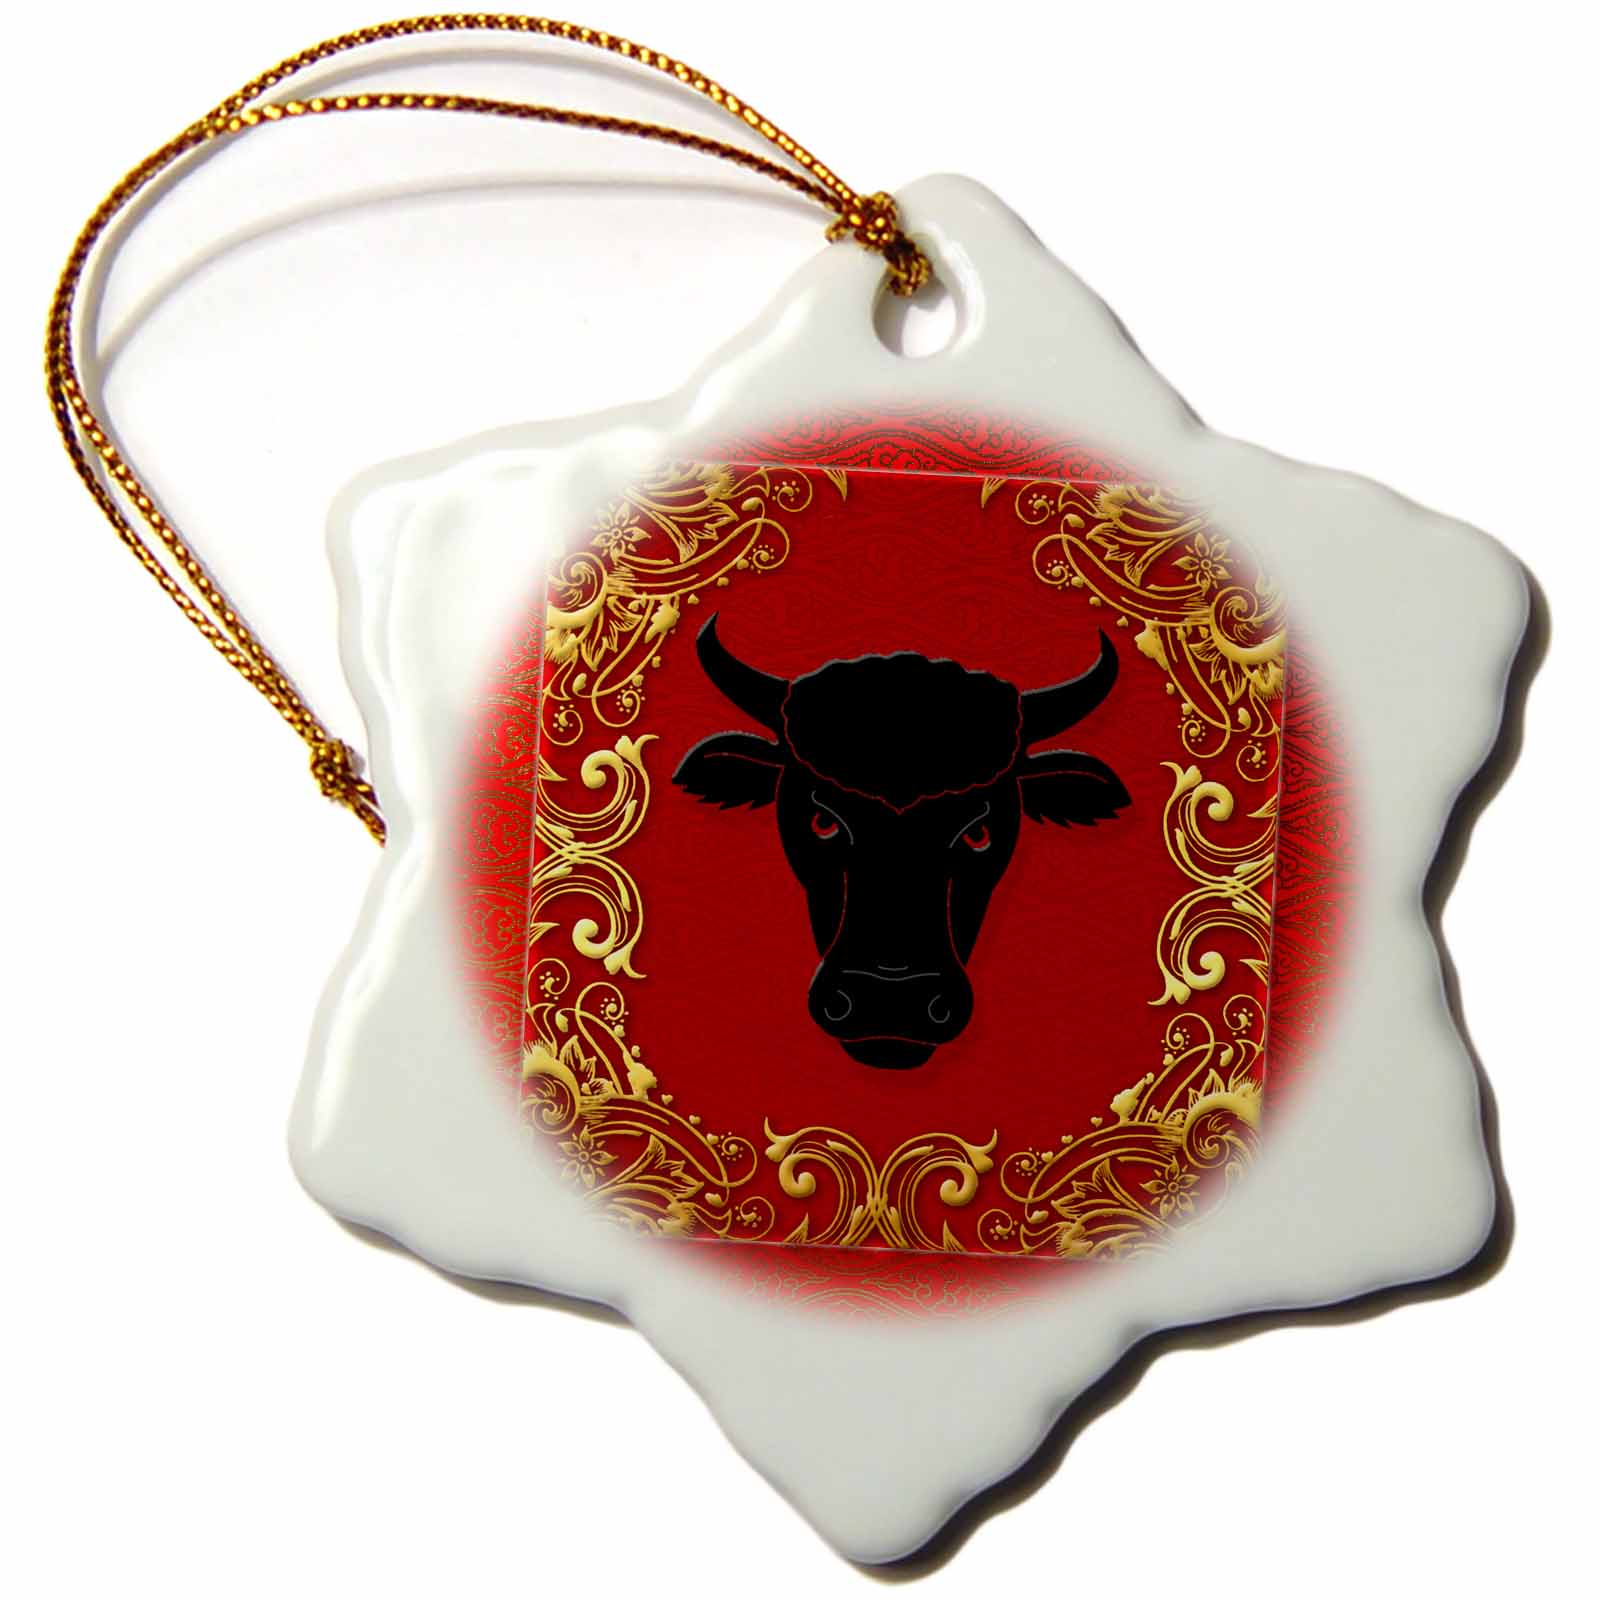 3dRose Chinese Zodiac Year of the Ox Multi-color Porcelain Holiday Decorative Accent Snowflake Ornament, 3" - image 1 of 1